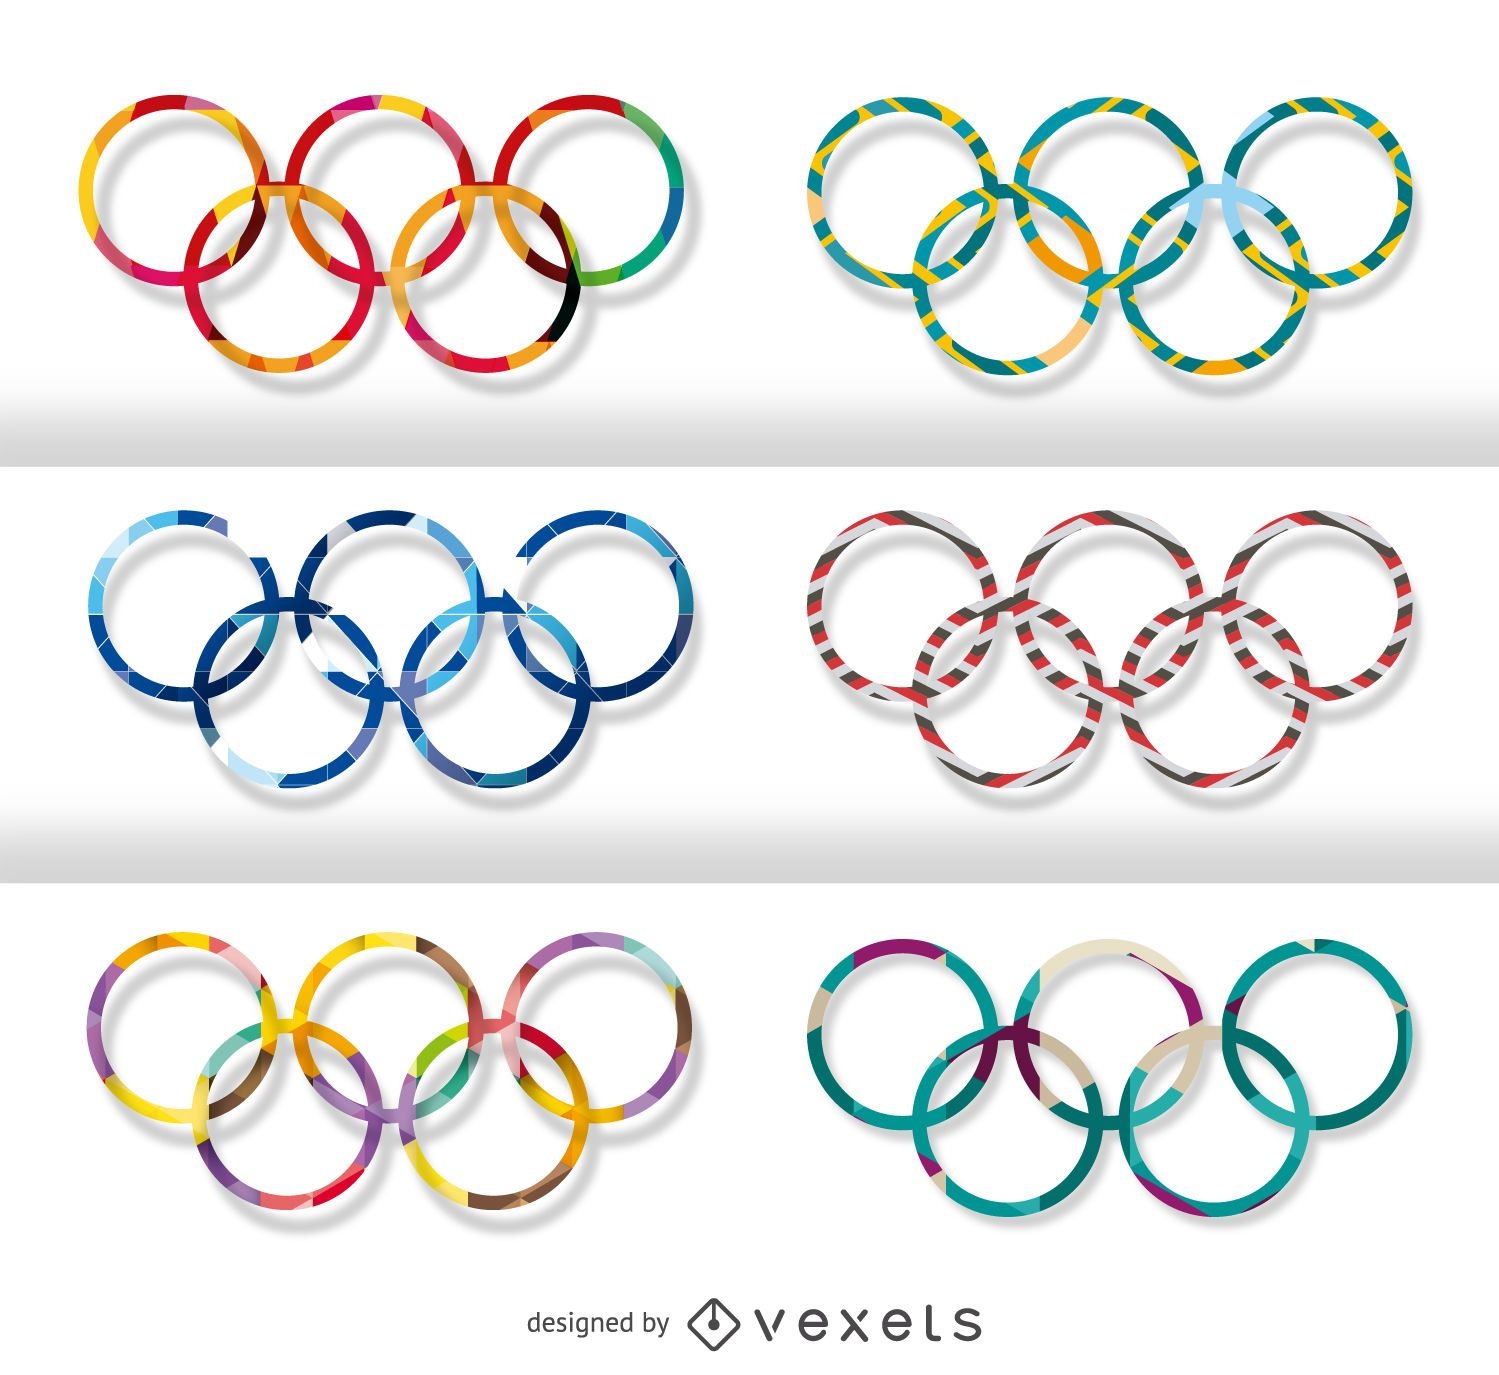 281 Olympic Rings Background Stock Video Footage - 4K and HD Video Clips |  Shutterstock